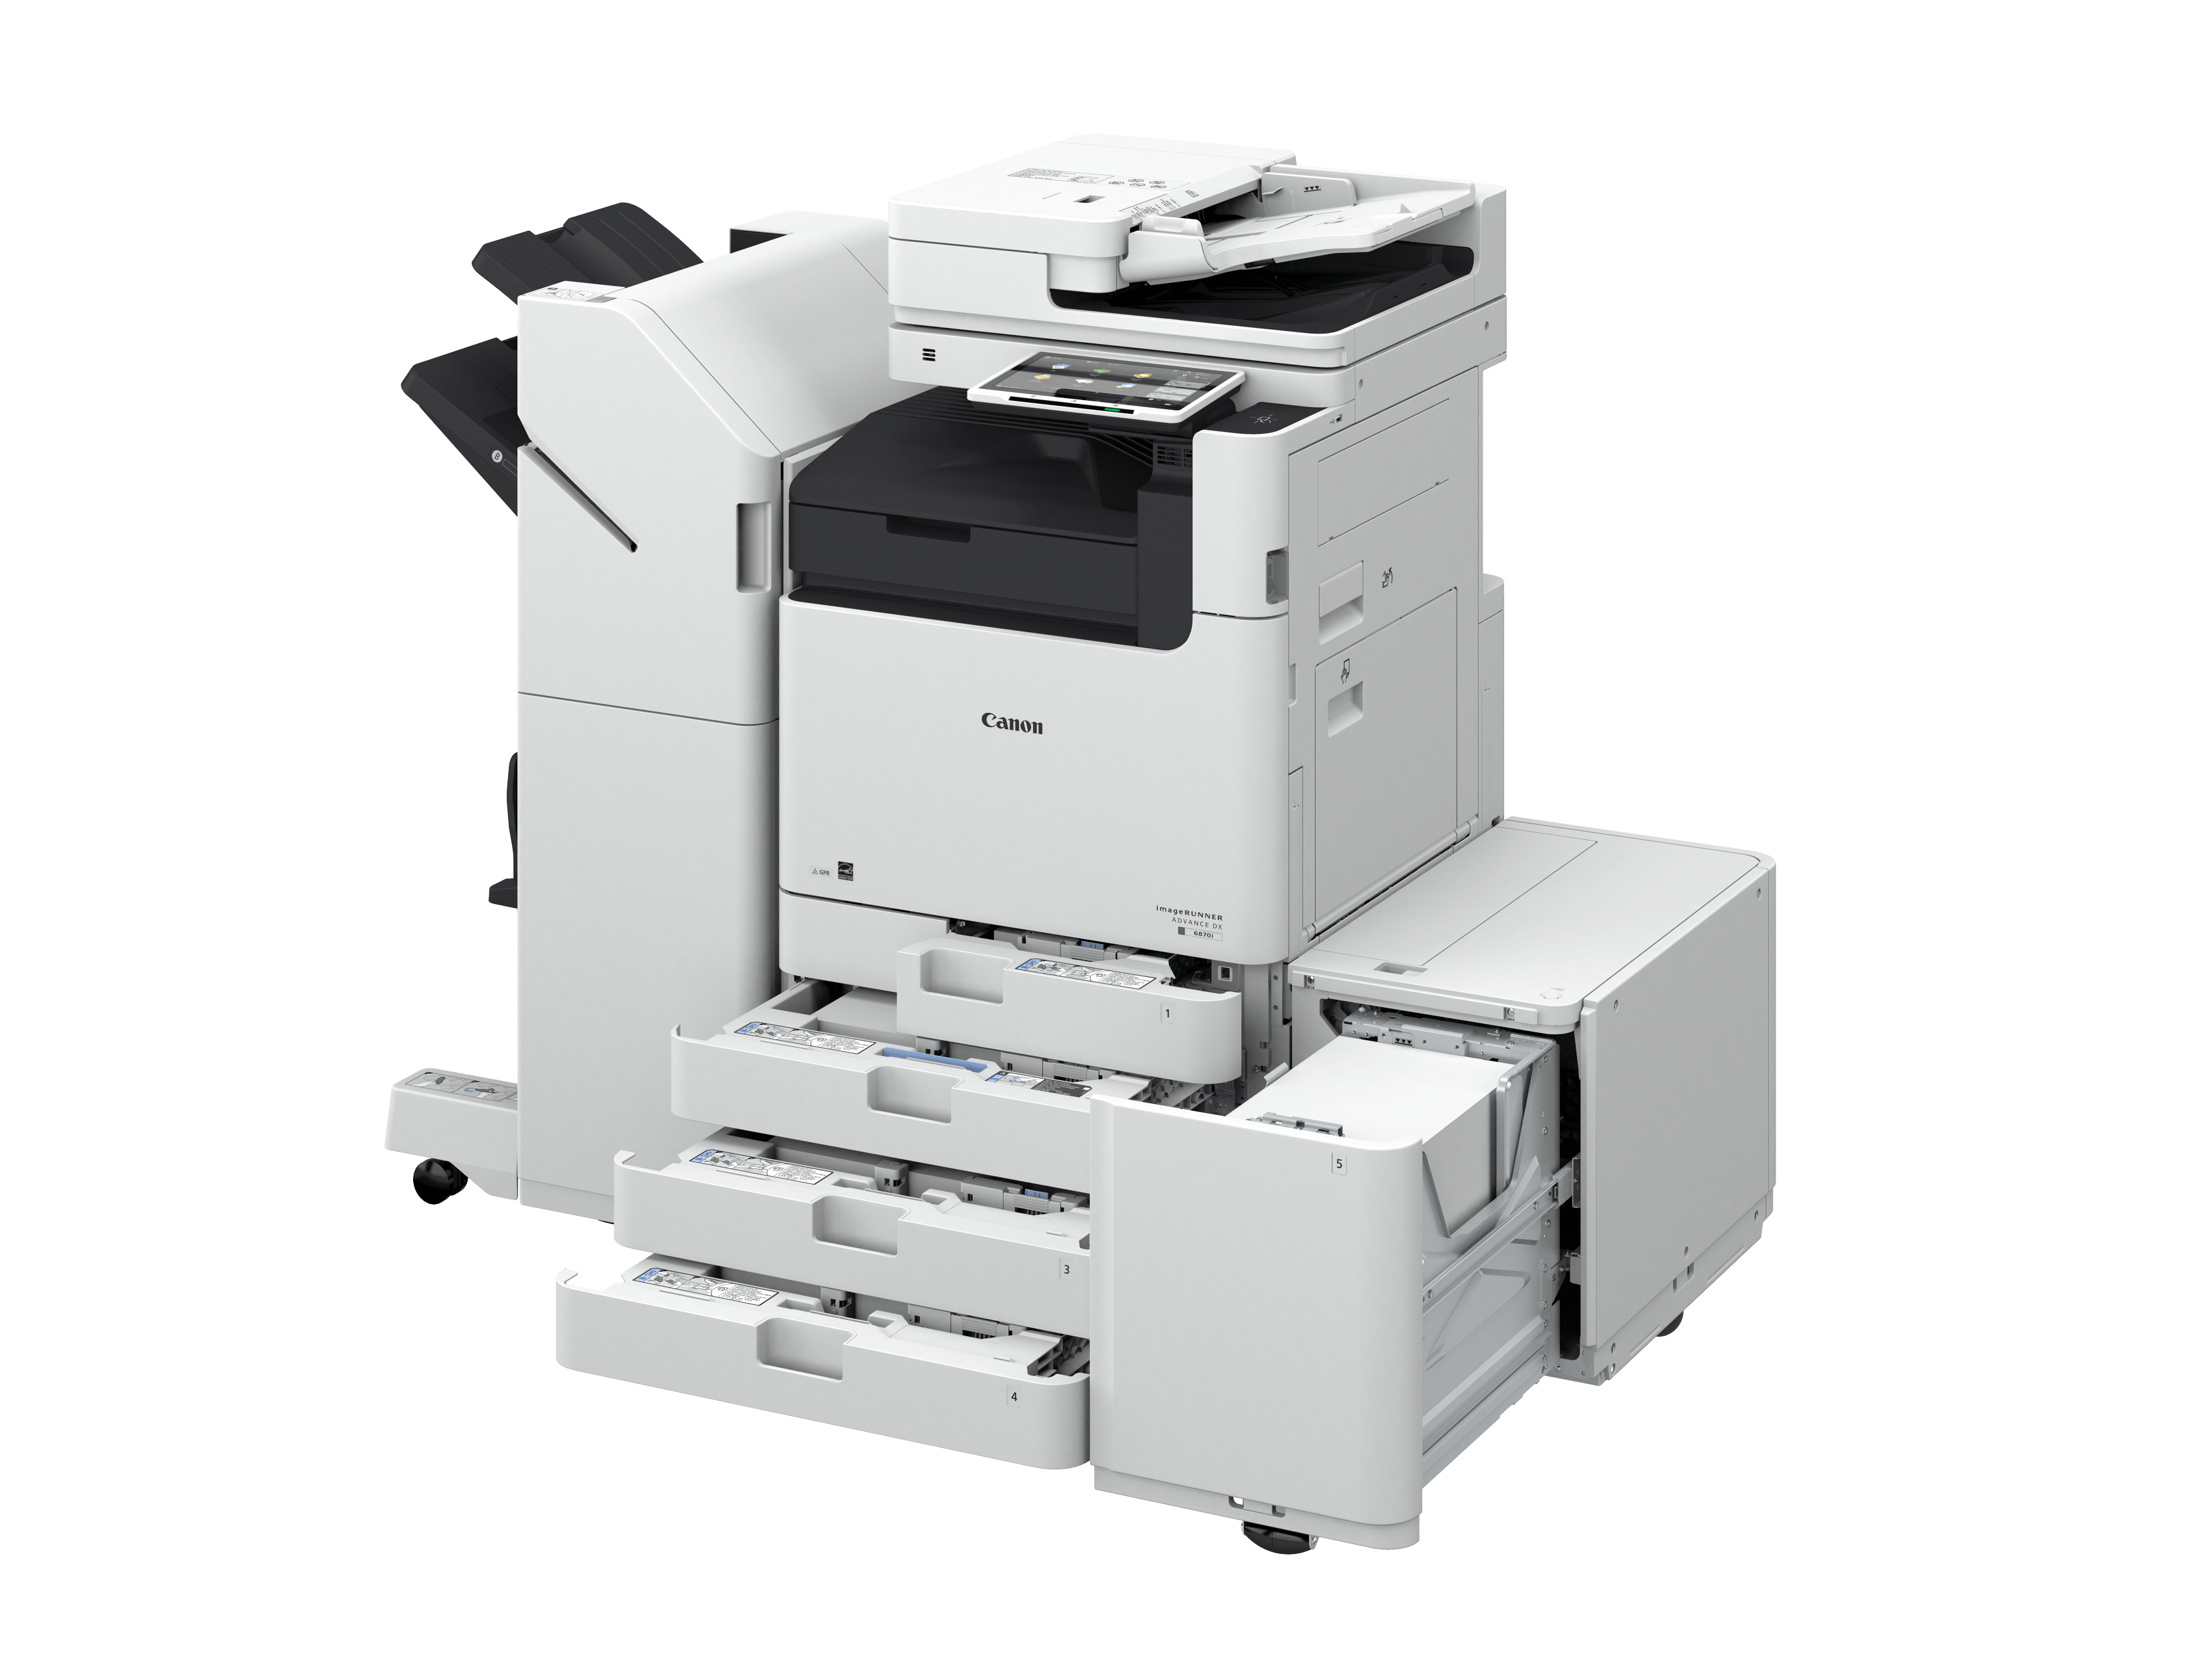 Absolute Toner New Repossessed Canon imageRUNNER ADVANCE DX 6855i Multifunction Black and White Business Copier and Printer Printers/Copiers